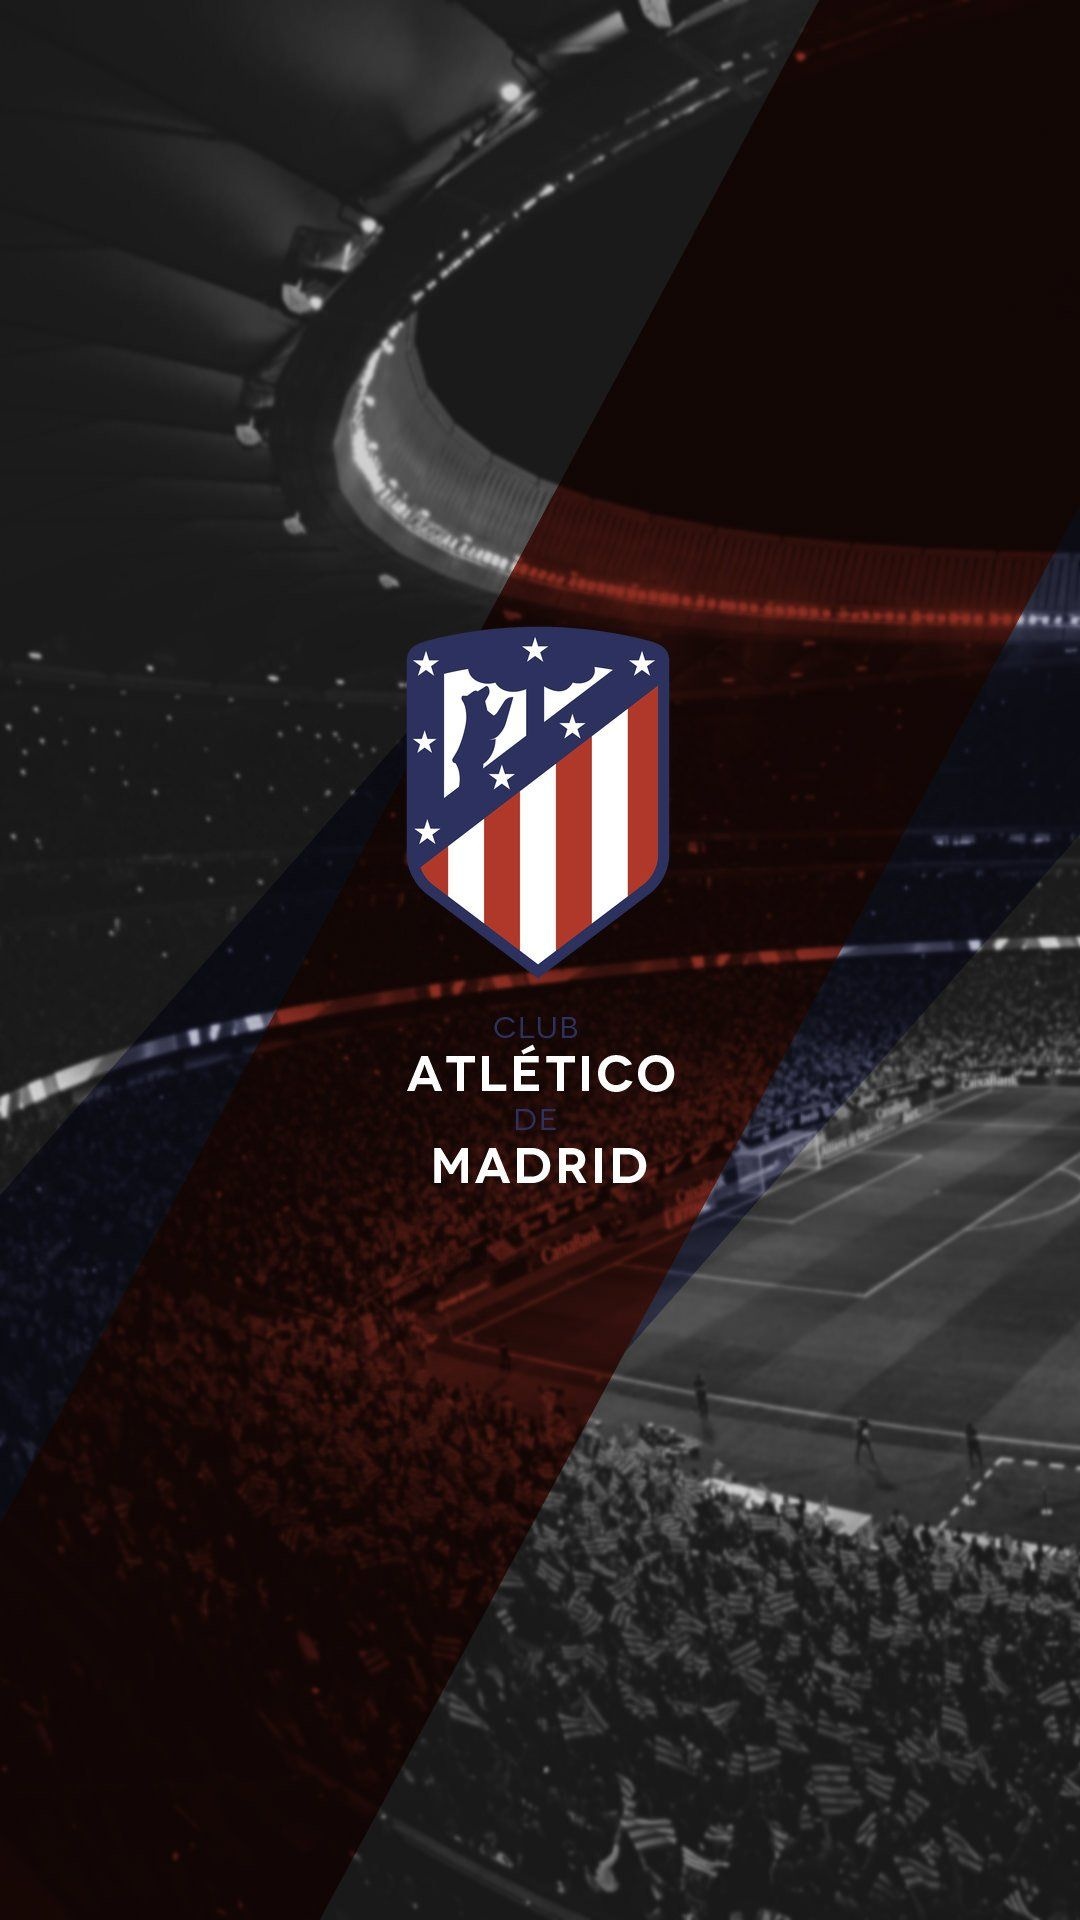 Atletico Madrid: The team lost 1963 European Cup Winners' Cup final to Tottenham Hotspur. 1080x1920 Full HD Wallpaper.